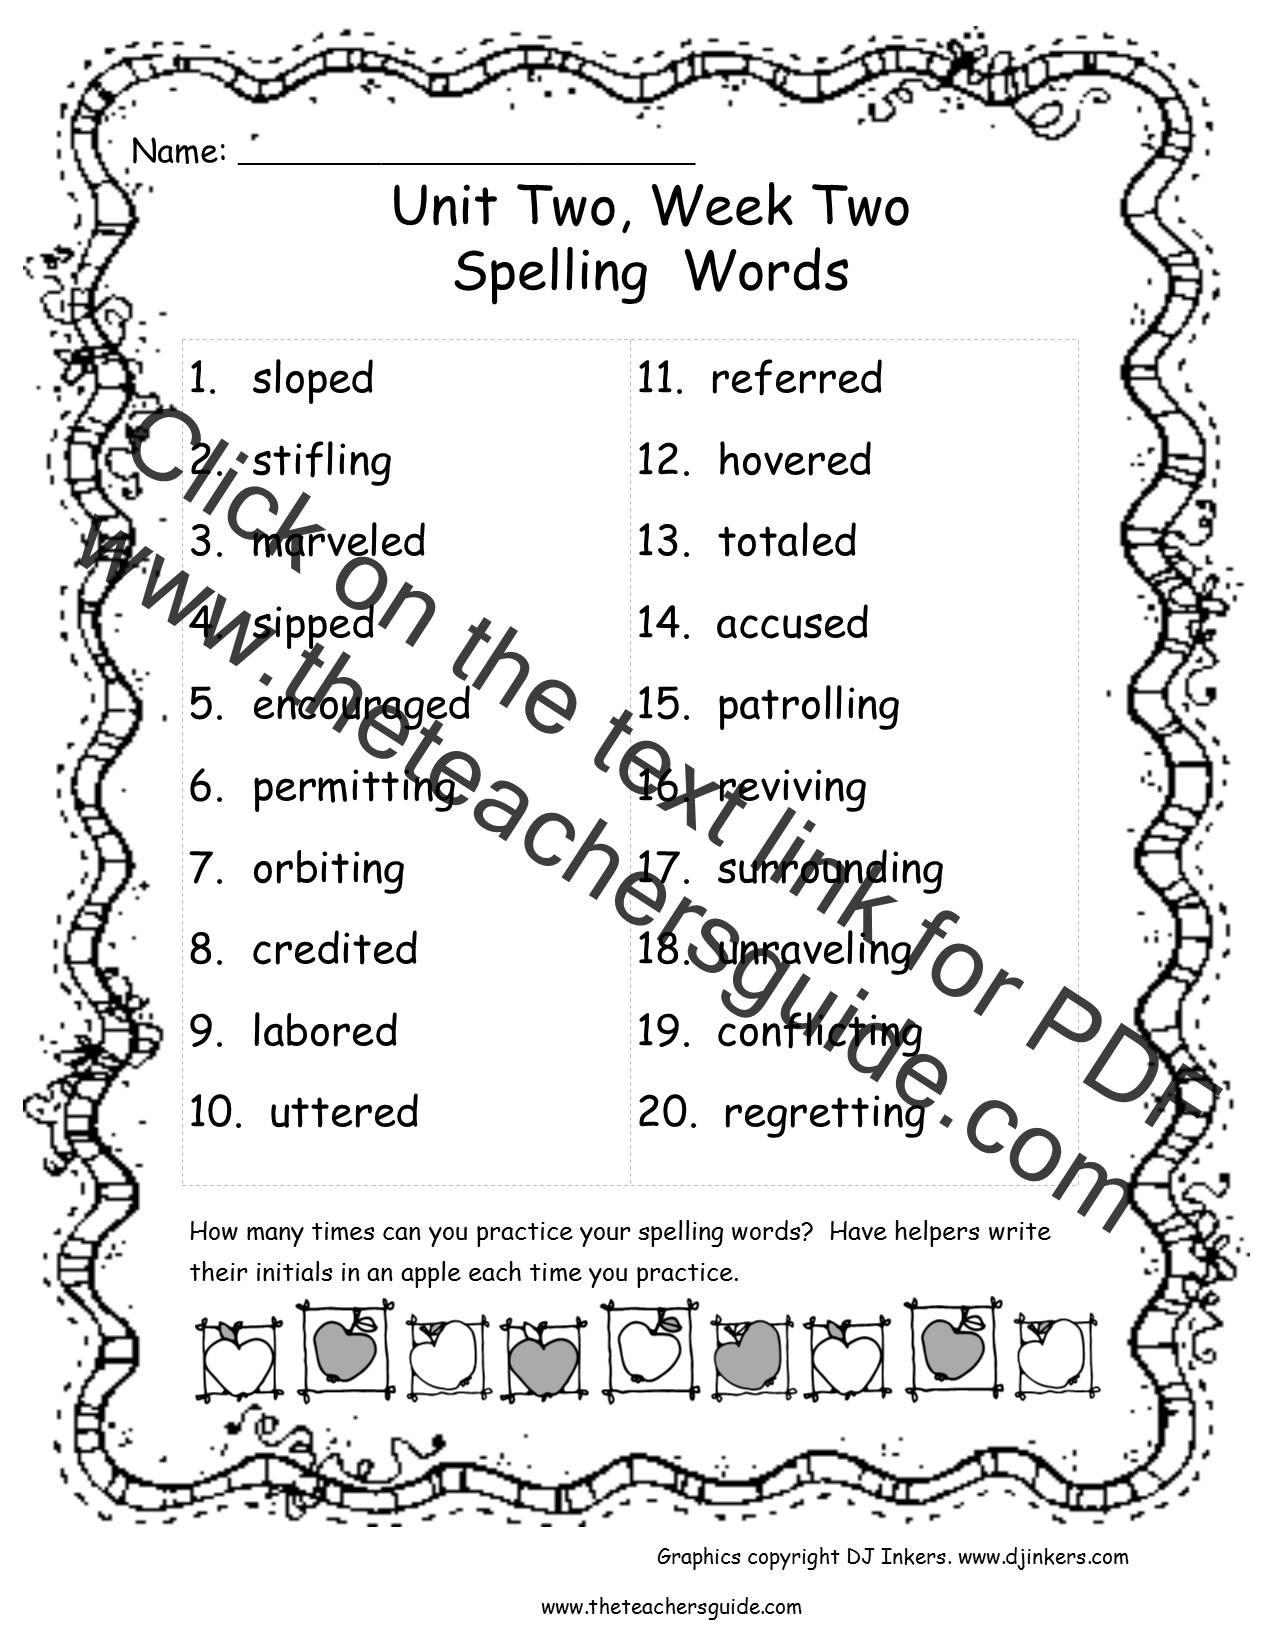 3rd-grade-spelling-words-week-1-third-grade-spelling-curriculum-week-two-3-boys-and-a-dog